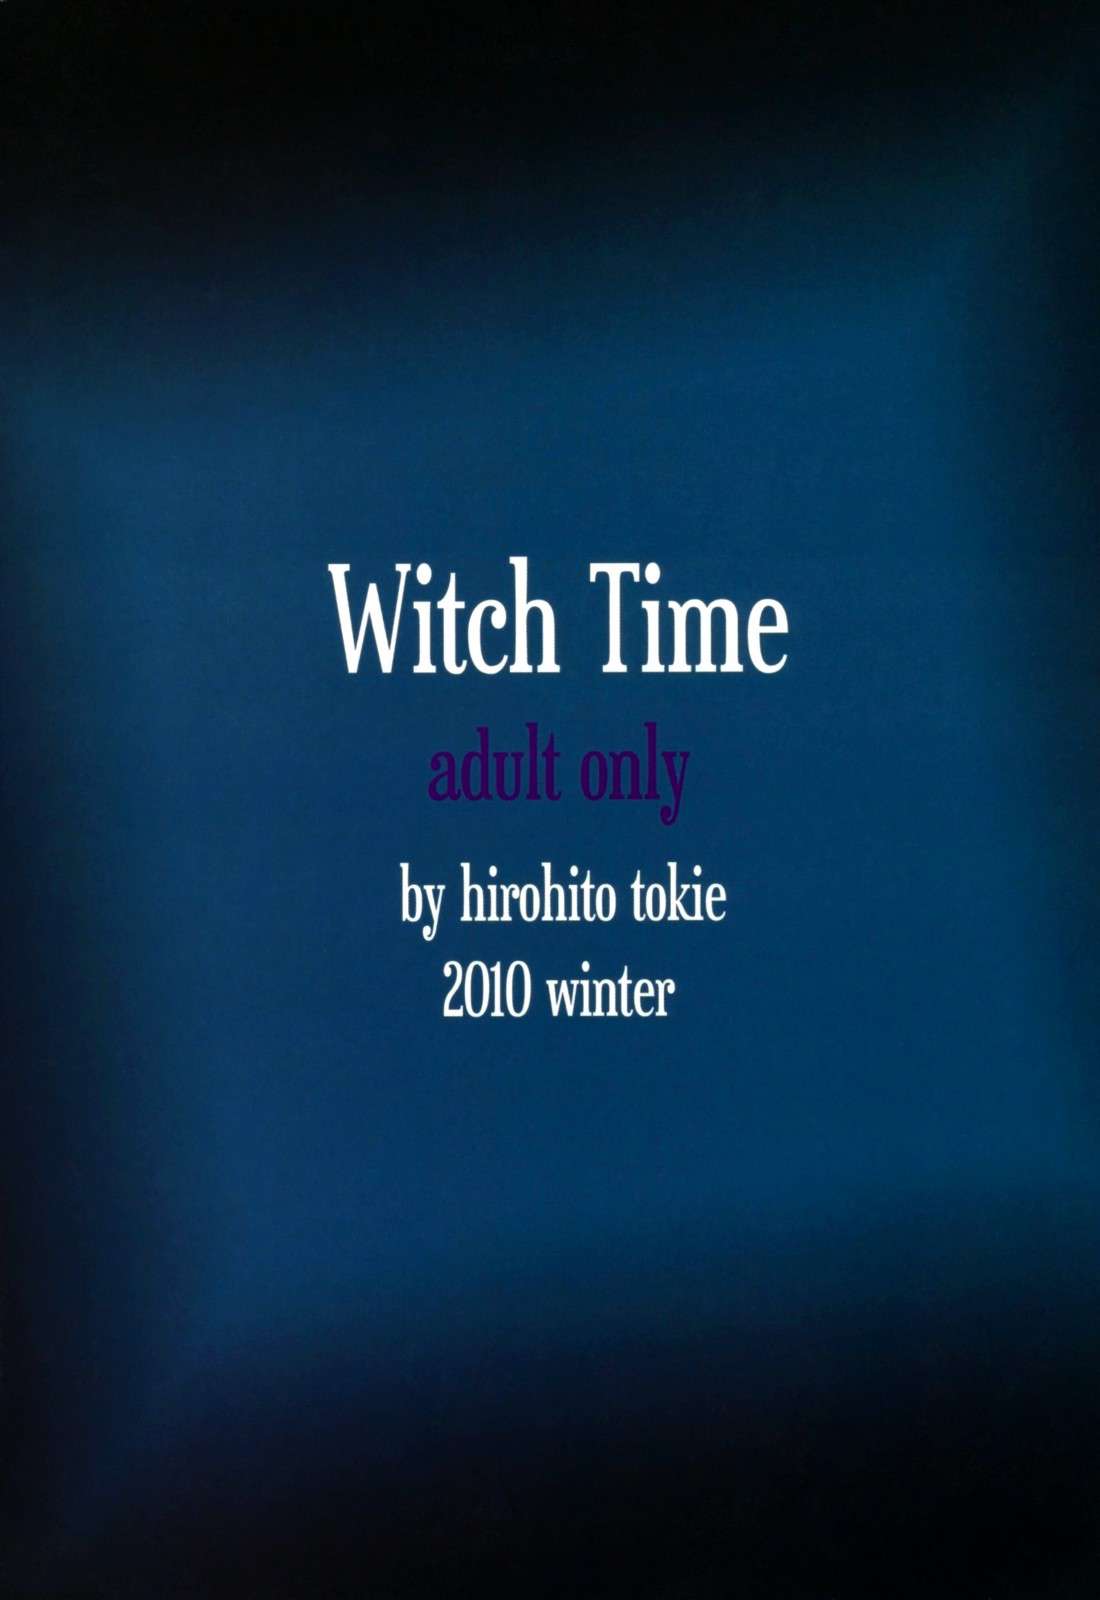 Witch Time - 20